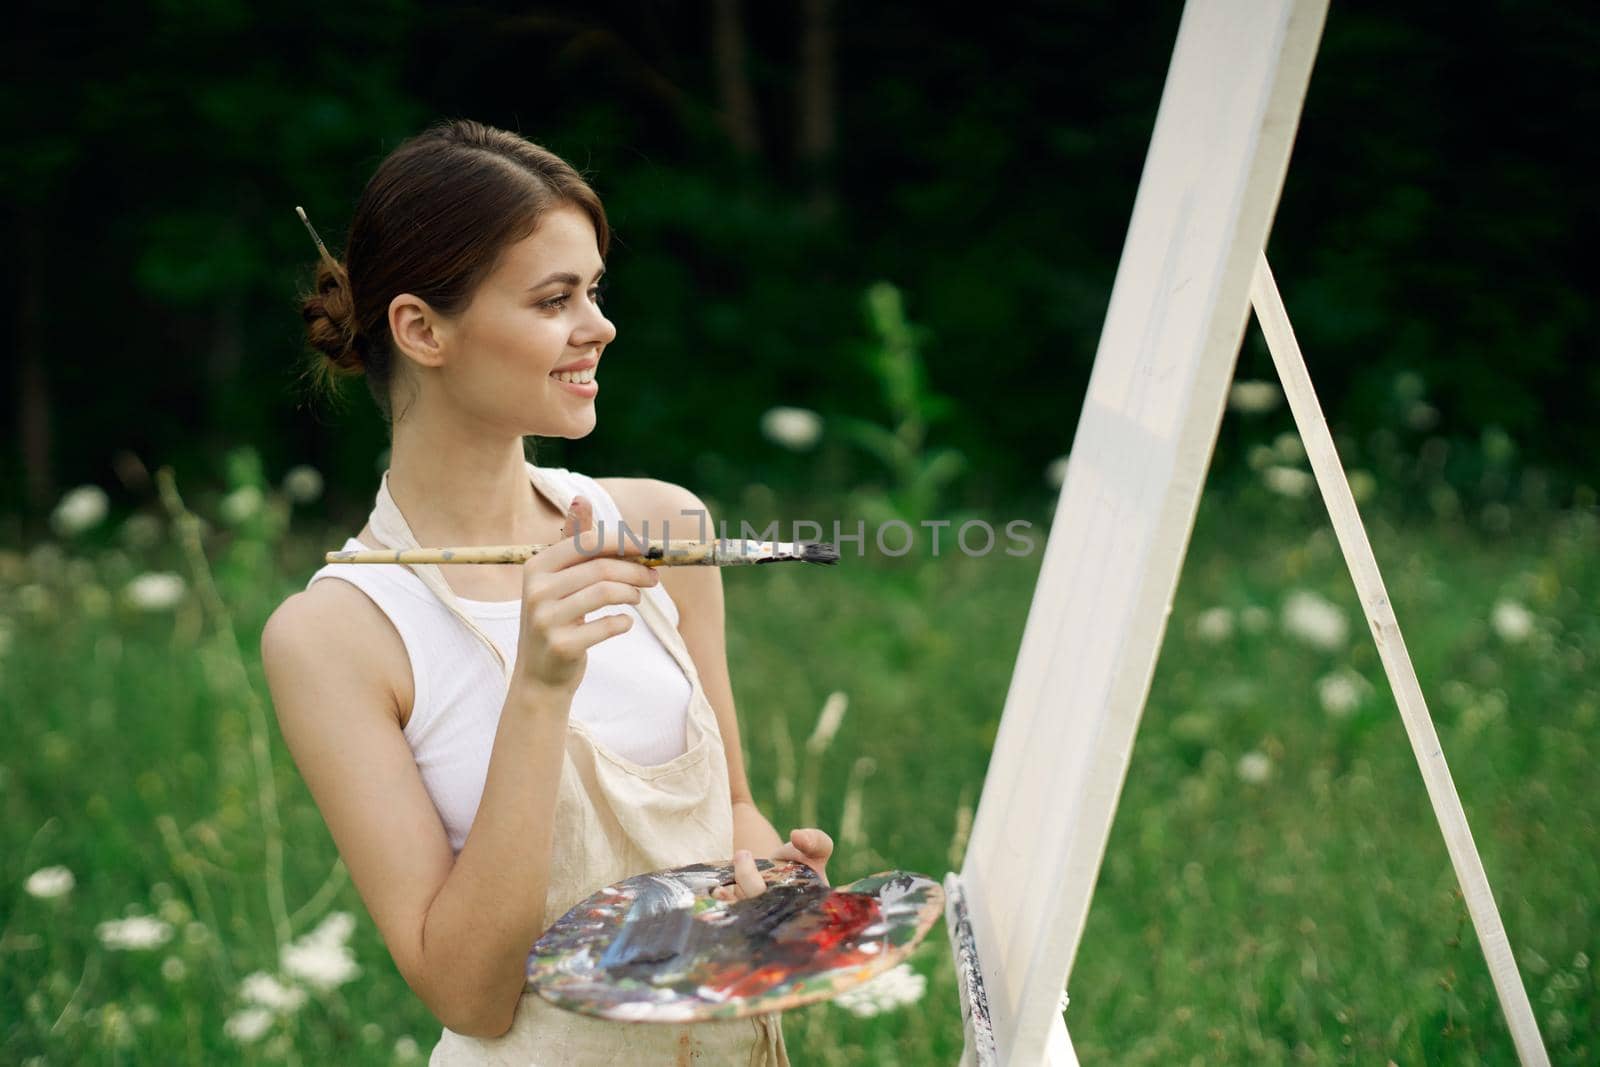 woman outdoors paint a picture landscape hobby creative. High quality photo